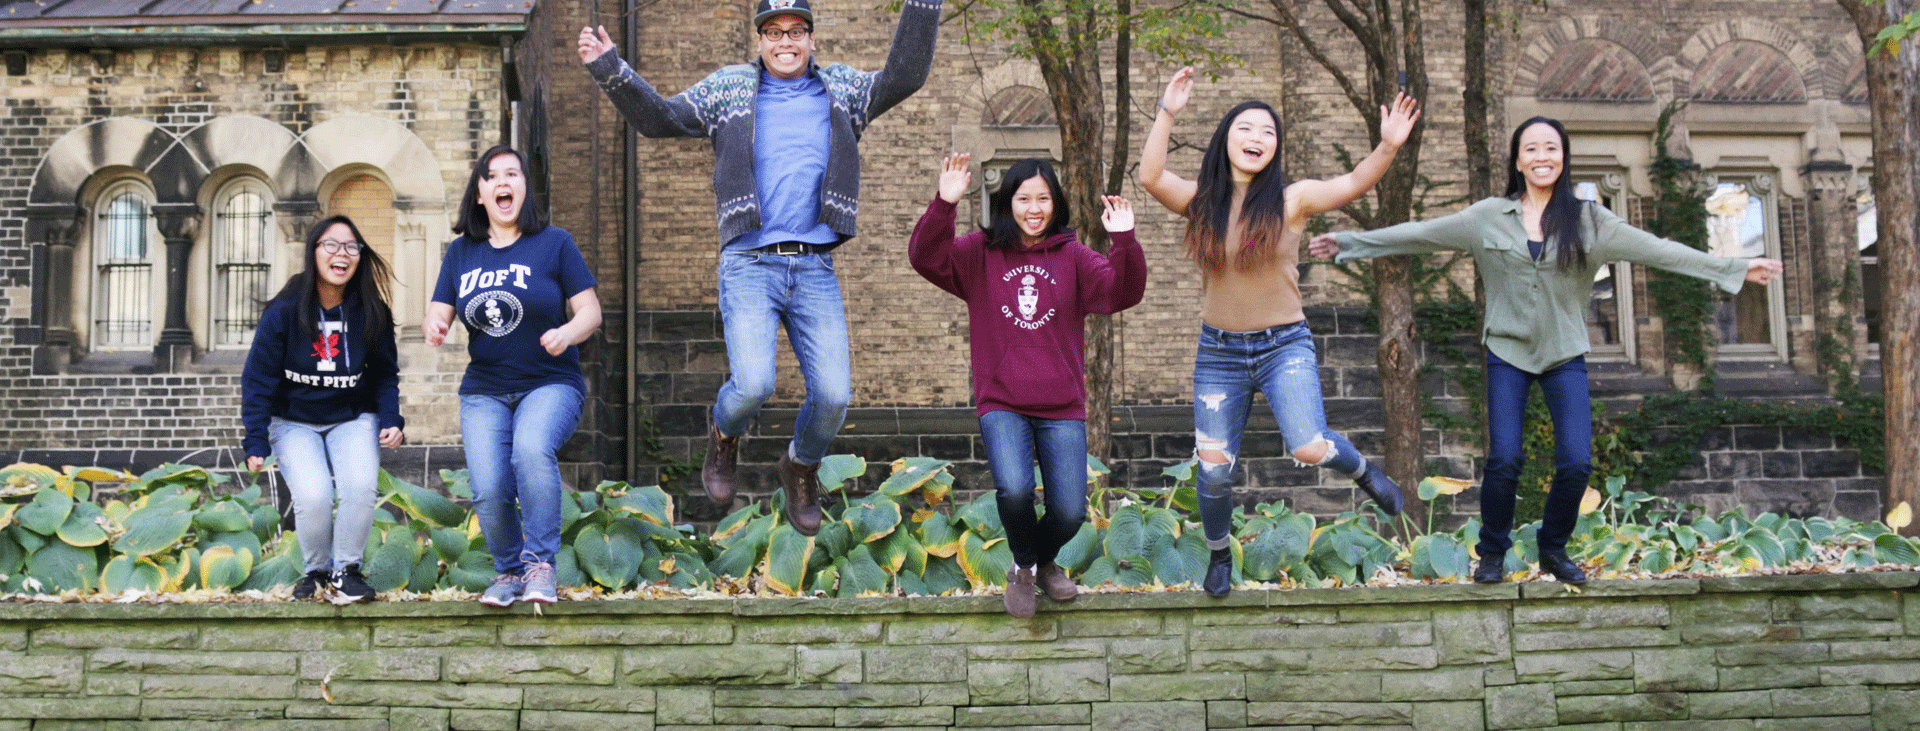 6 students jumping for joy